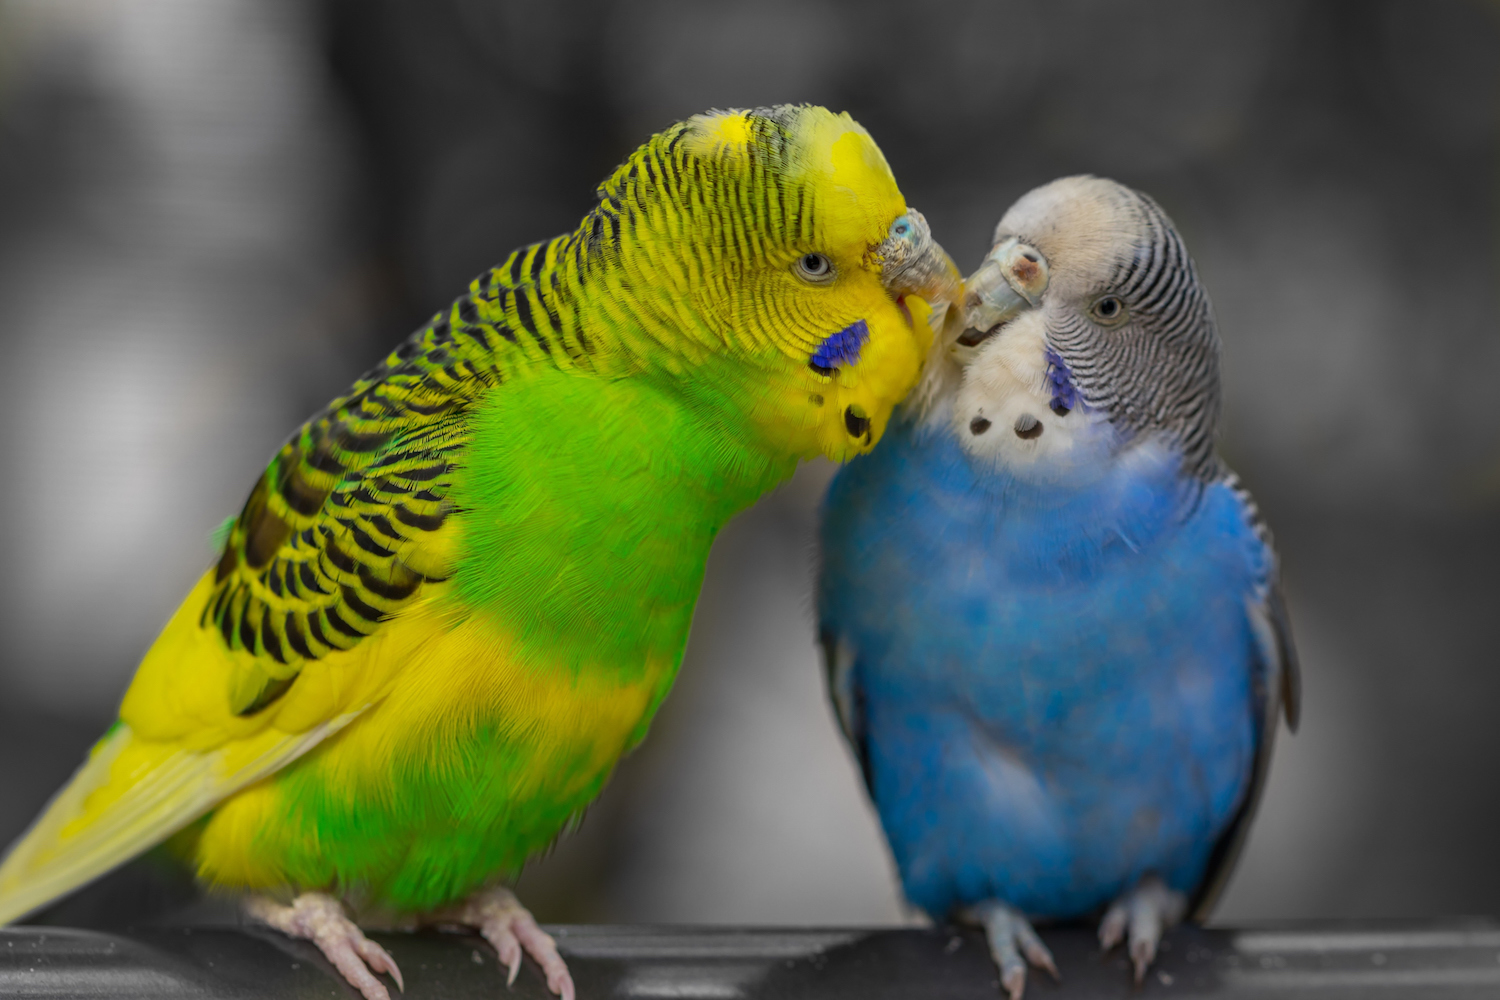 For budgies brains beat brawn in mating game - Cosmos Magazine